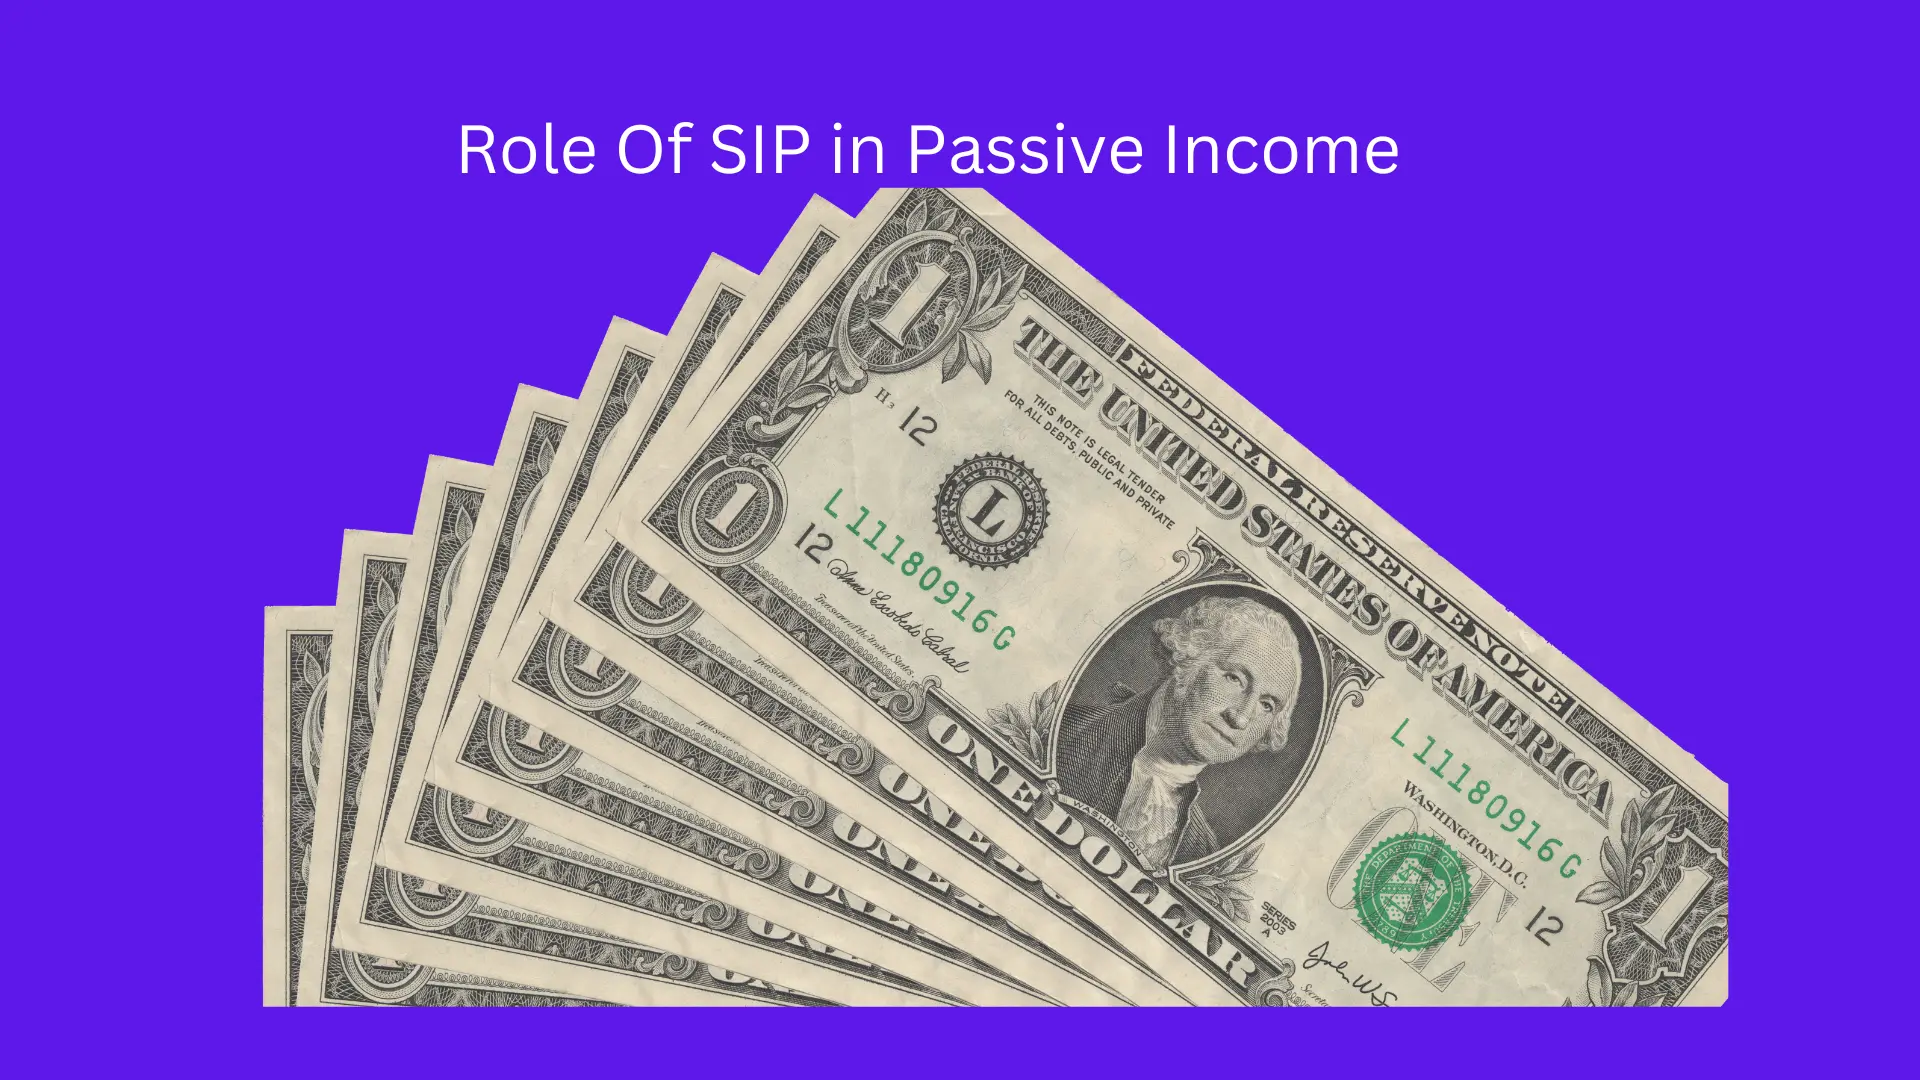 Role of SIPs in generating passive income